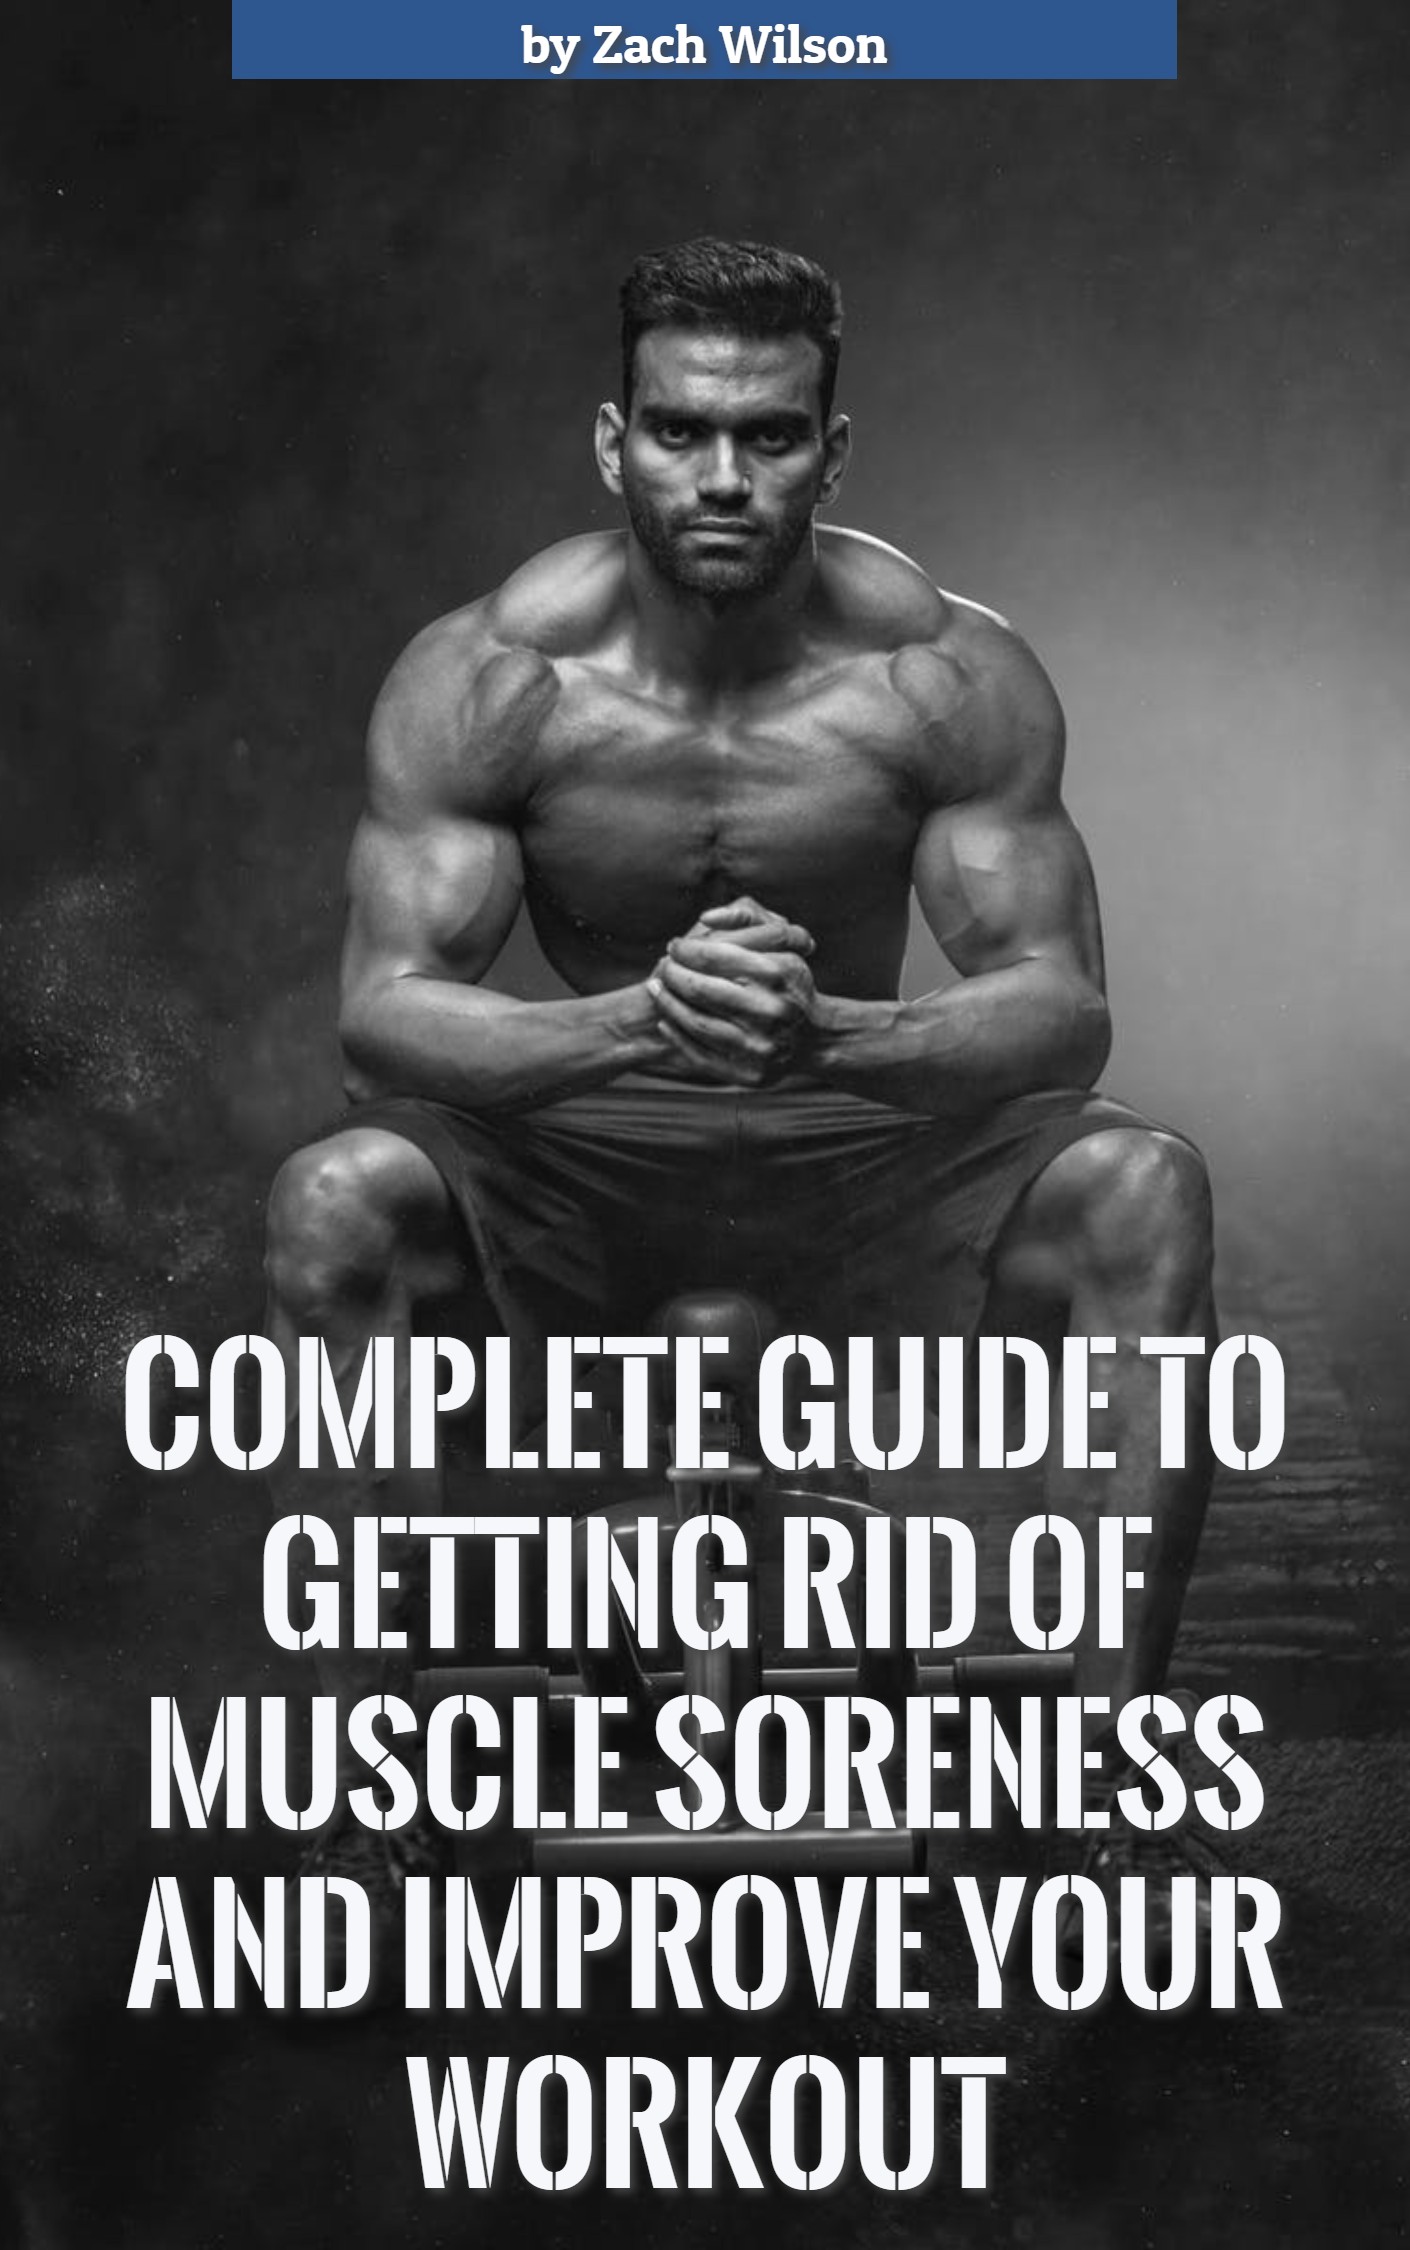 FREE: Complete guide to getting rid of MUSCLE SORENESS and improve your workout by Zach Wilson